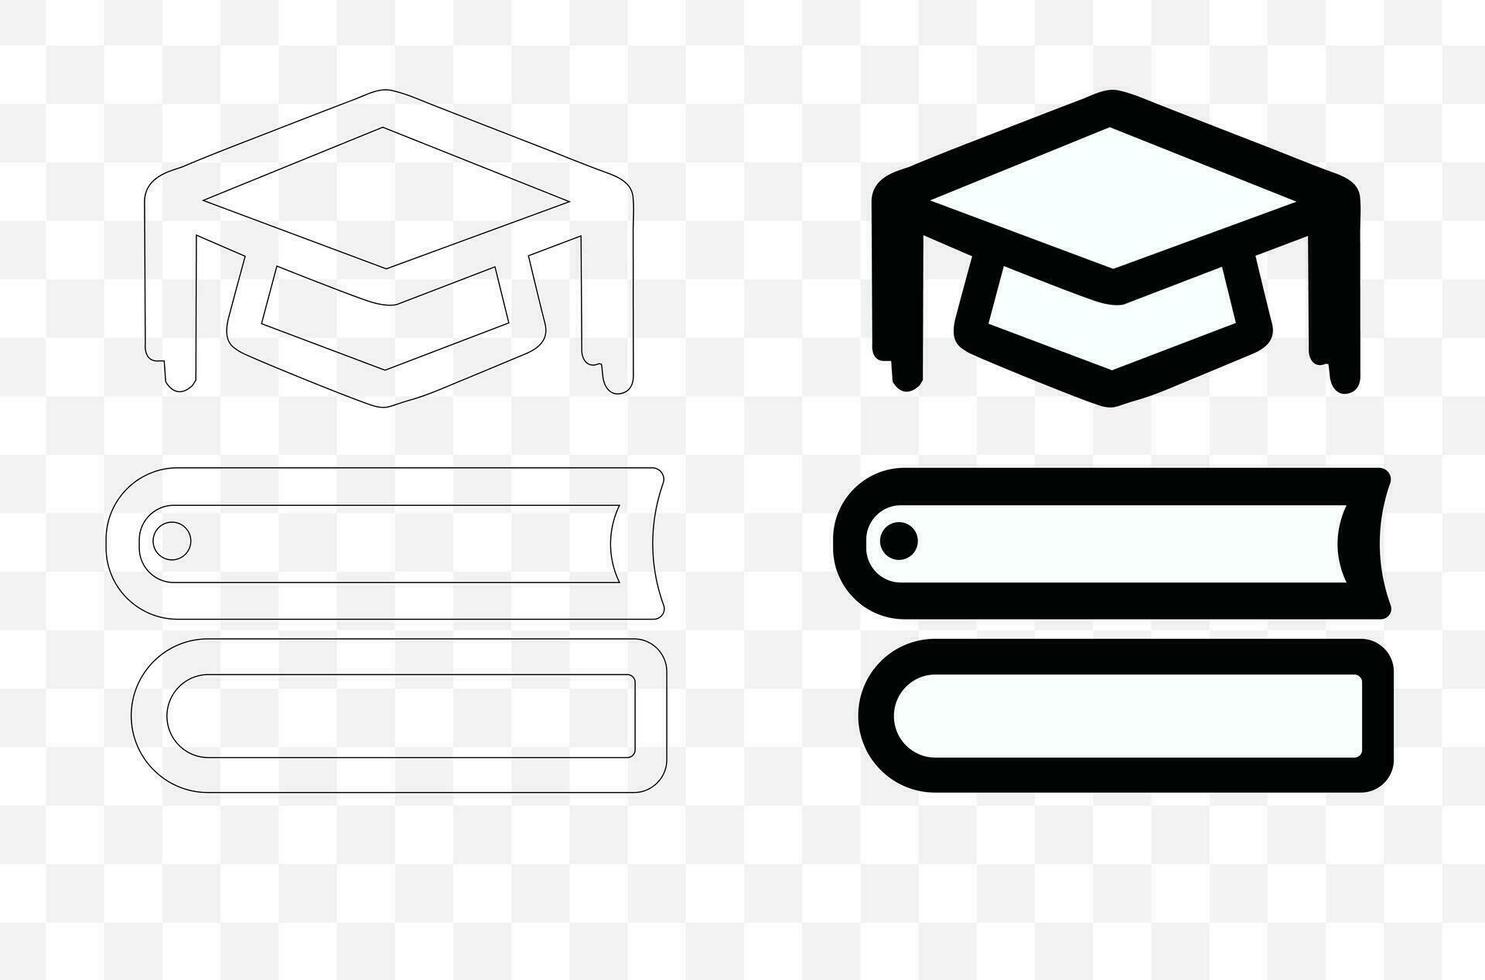 a set of educational icons icons for education in a vector format.